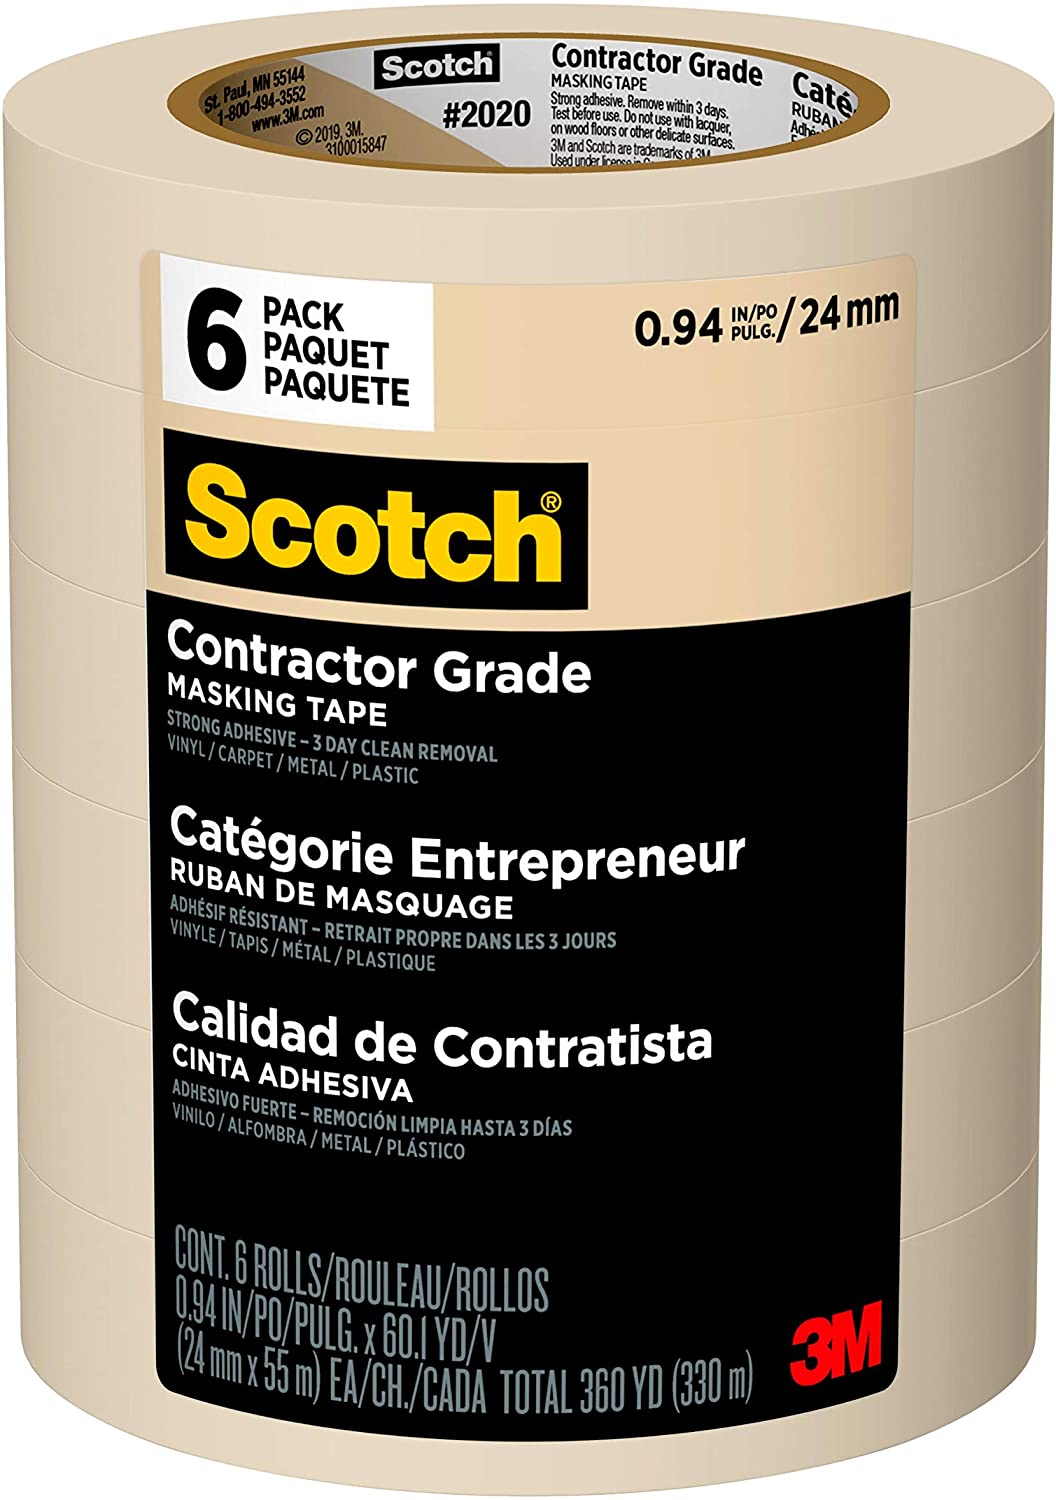 Scotch Contractor Grade Masking Tape, 0.94 inches by 60.1 yards (360 yards  total), 2020, Rolls